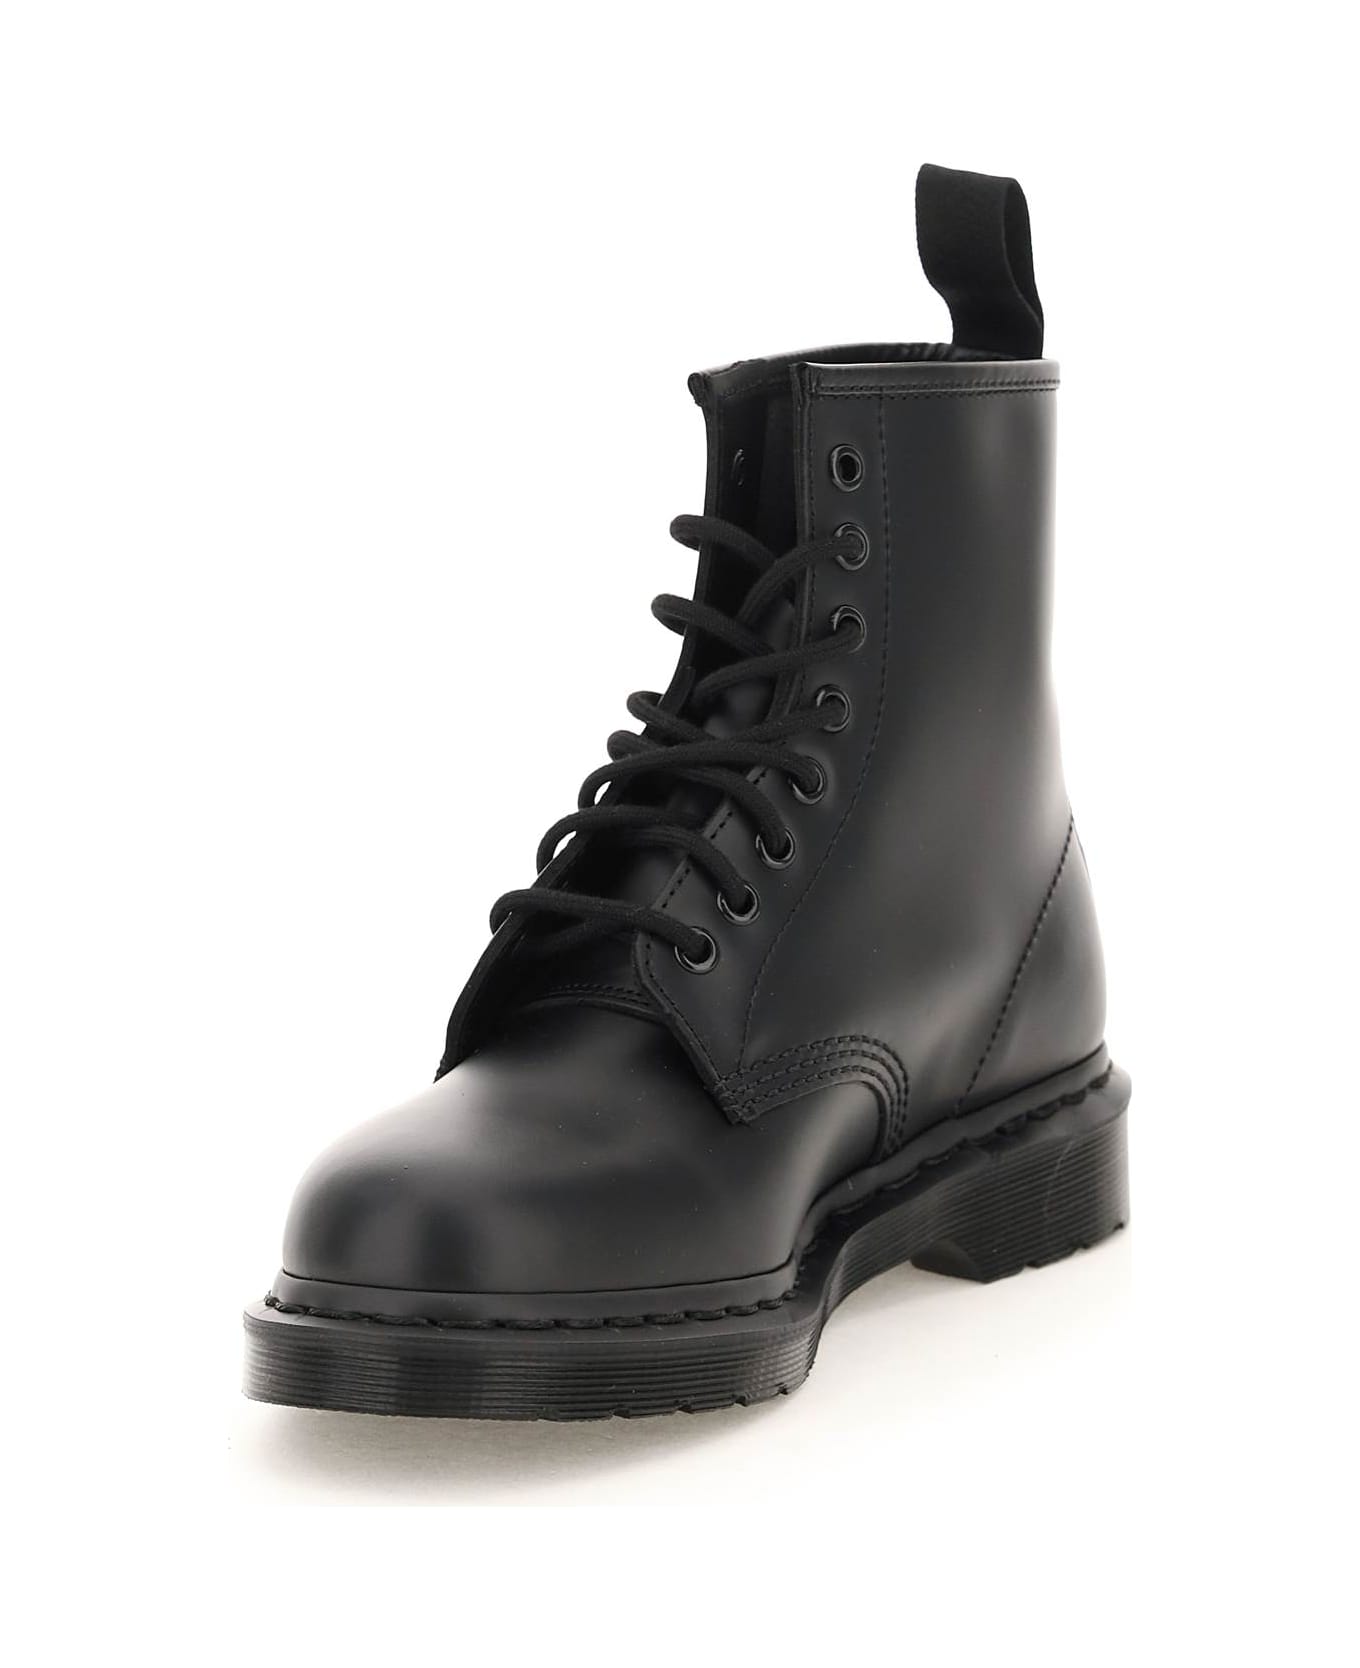 Dr. Martens 1460 Mono Smooth Lace-up Combat Boots - black ブーツ